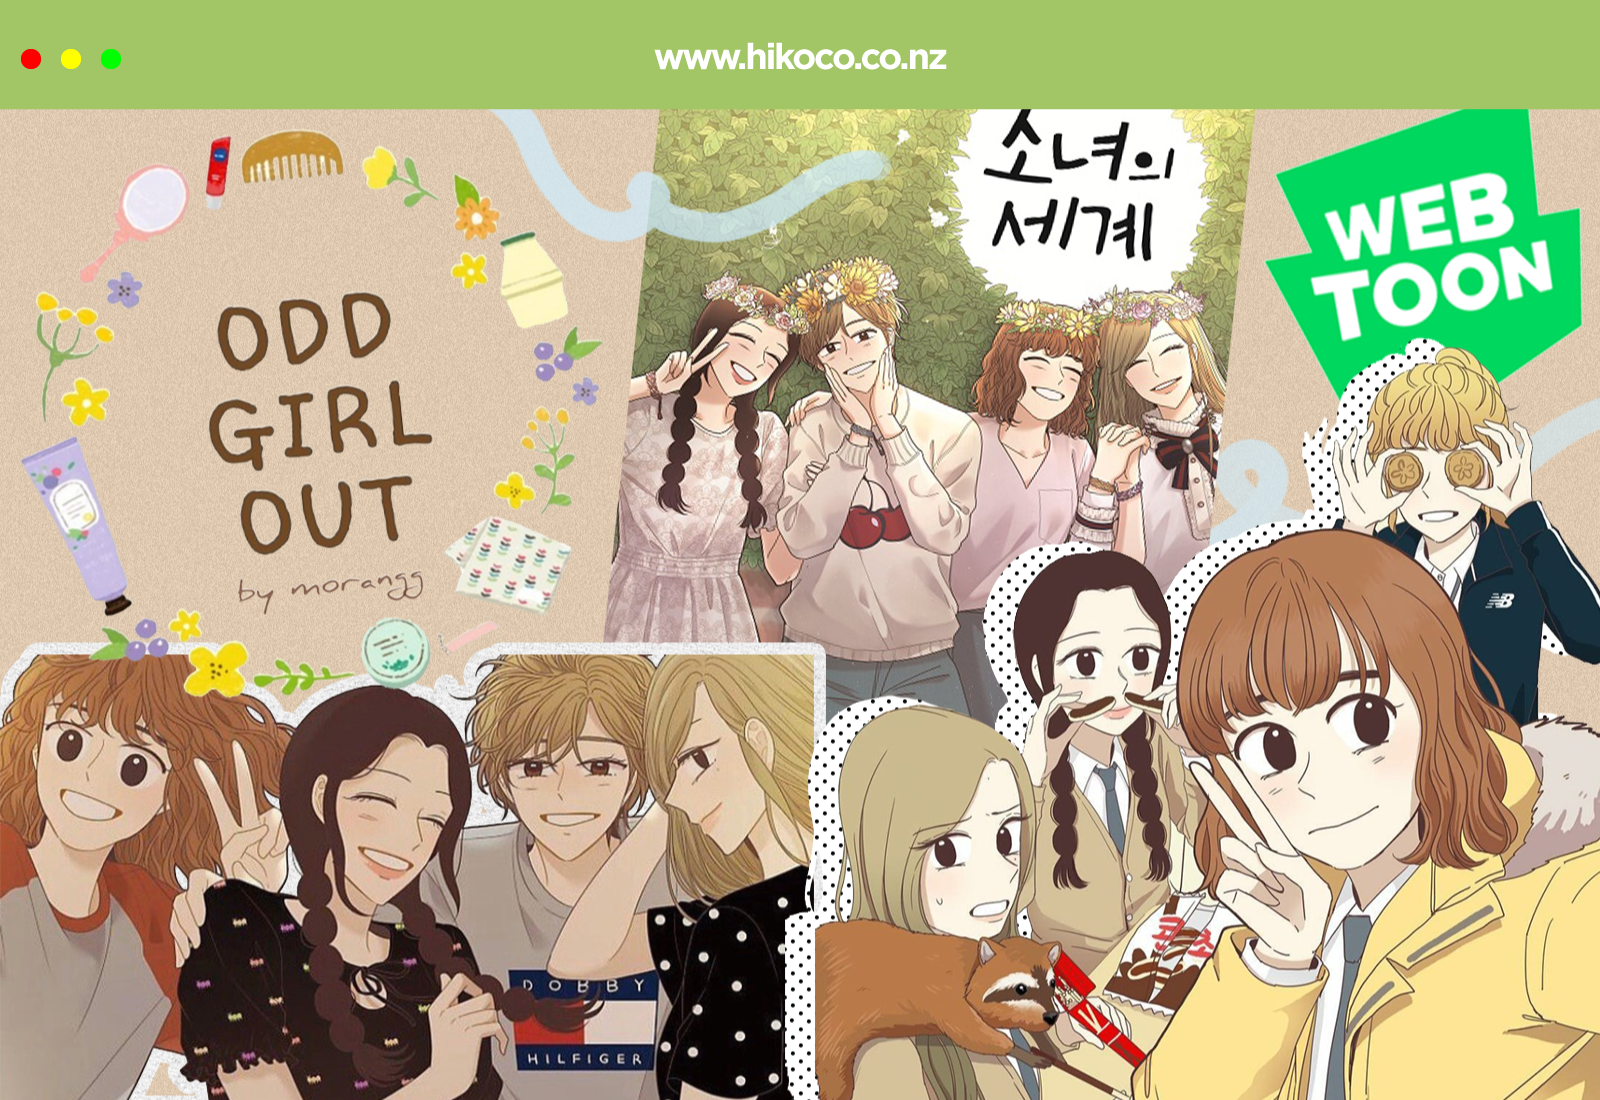 WEBTOON: What’s a High School Life Without Drama?